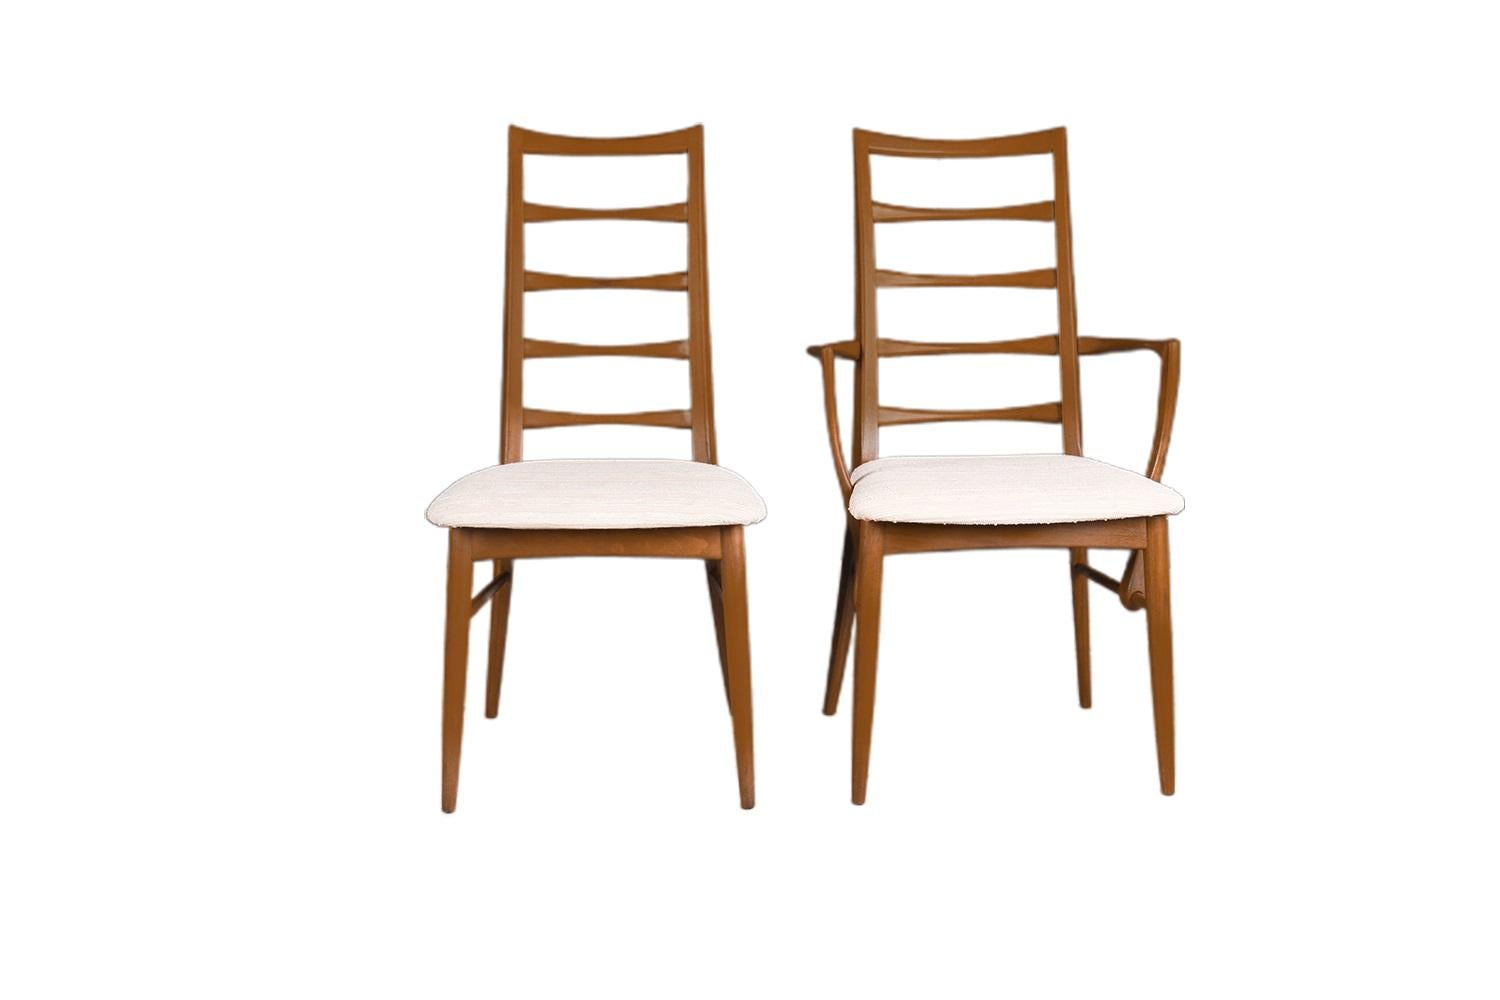 Mid-20th Century Danish Niels Koefoed for Koefoeds Hornslet Lis Chairs For Sale